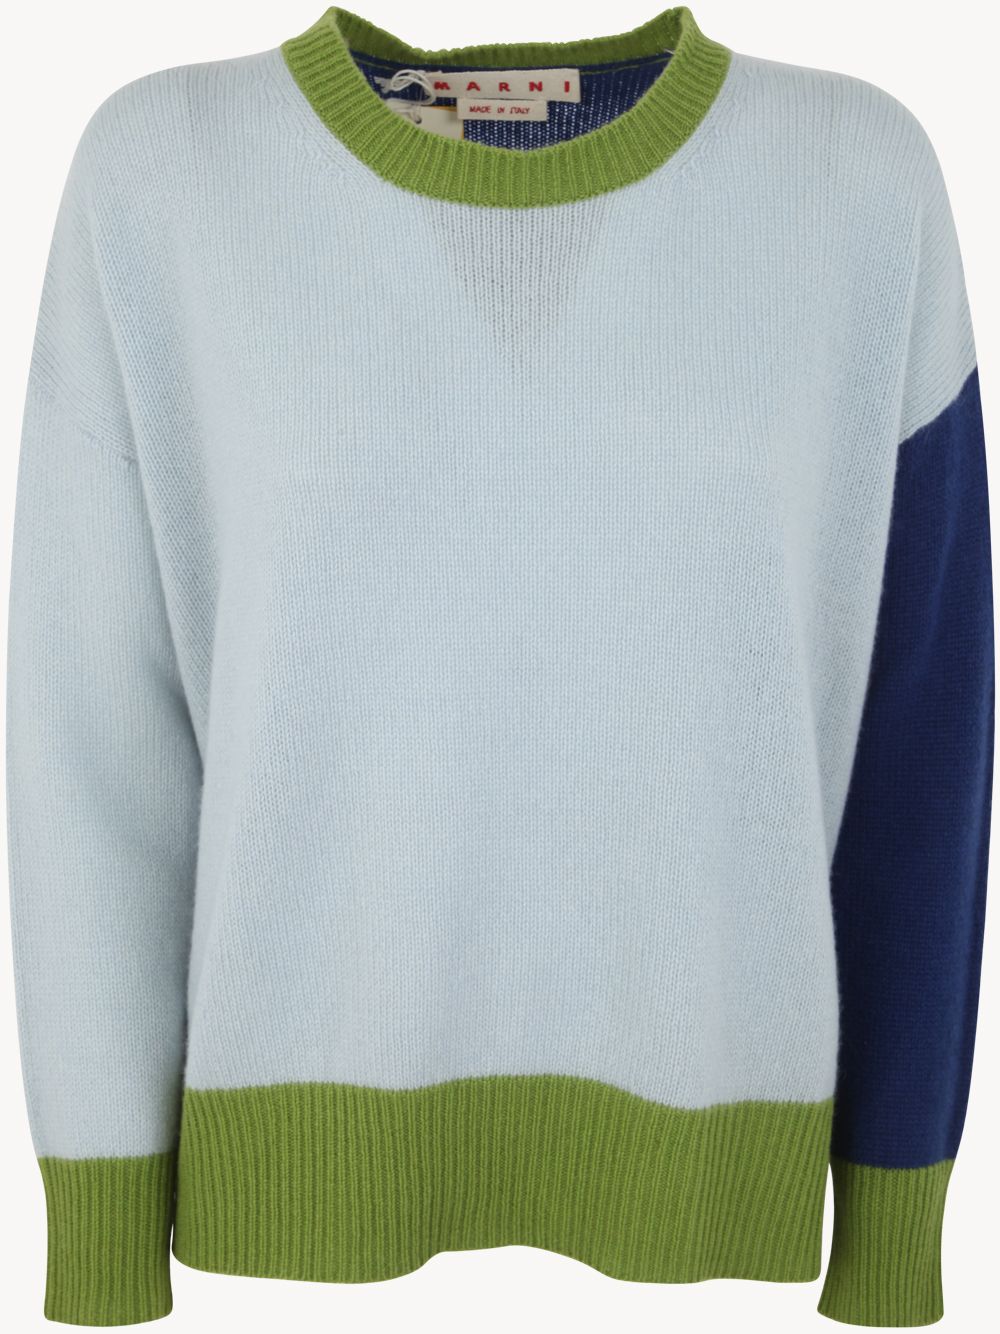 Shop Marni Crew Neck Long Sleeves Loose Fit Sweater